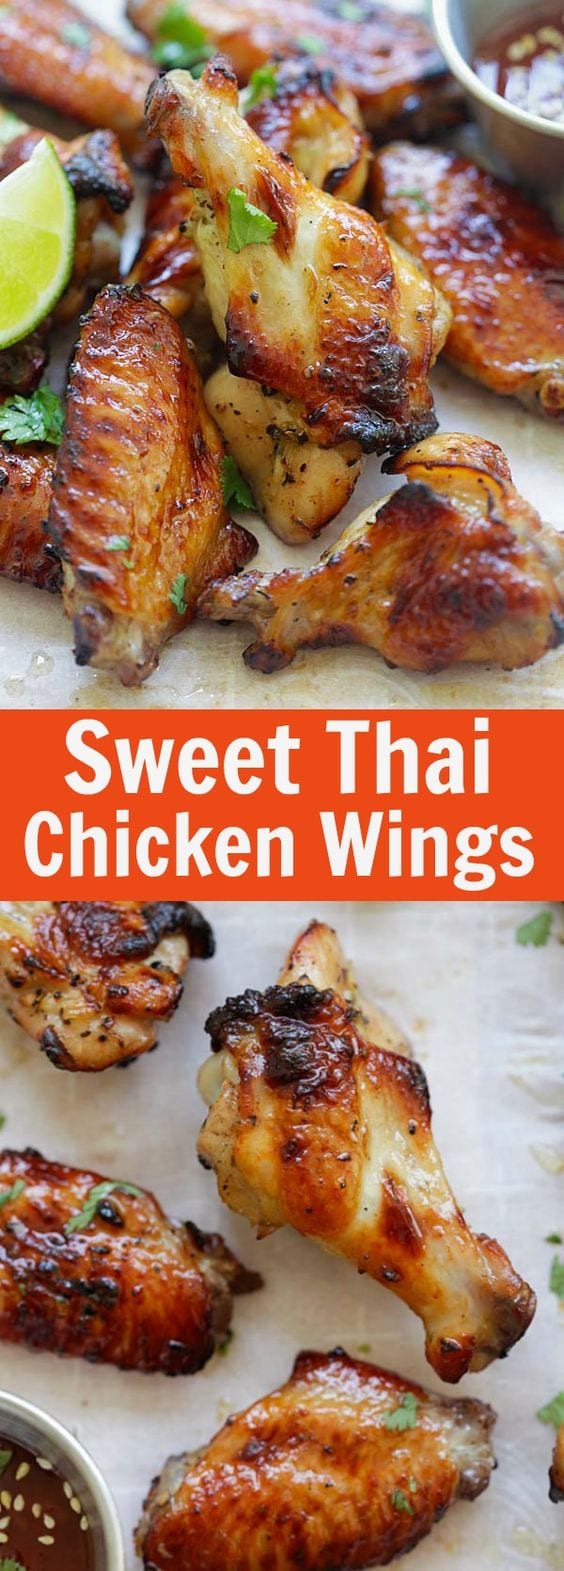 Sweet Thai Chicken Wings - perfectly grilled chicken wings with sweet Thai seasoning. Crazy delicious wings you can't stop eating | rasamalaysia.com